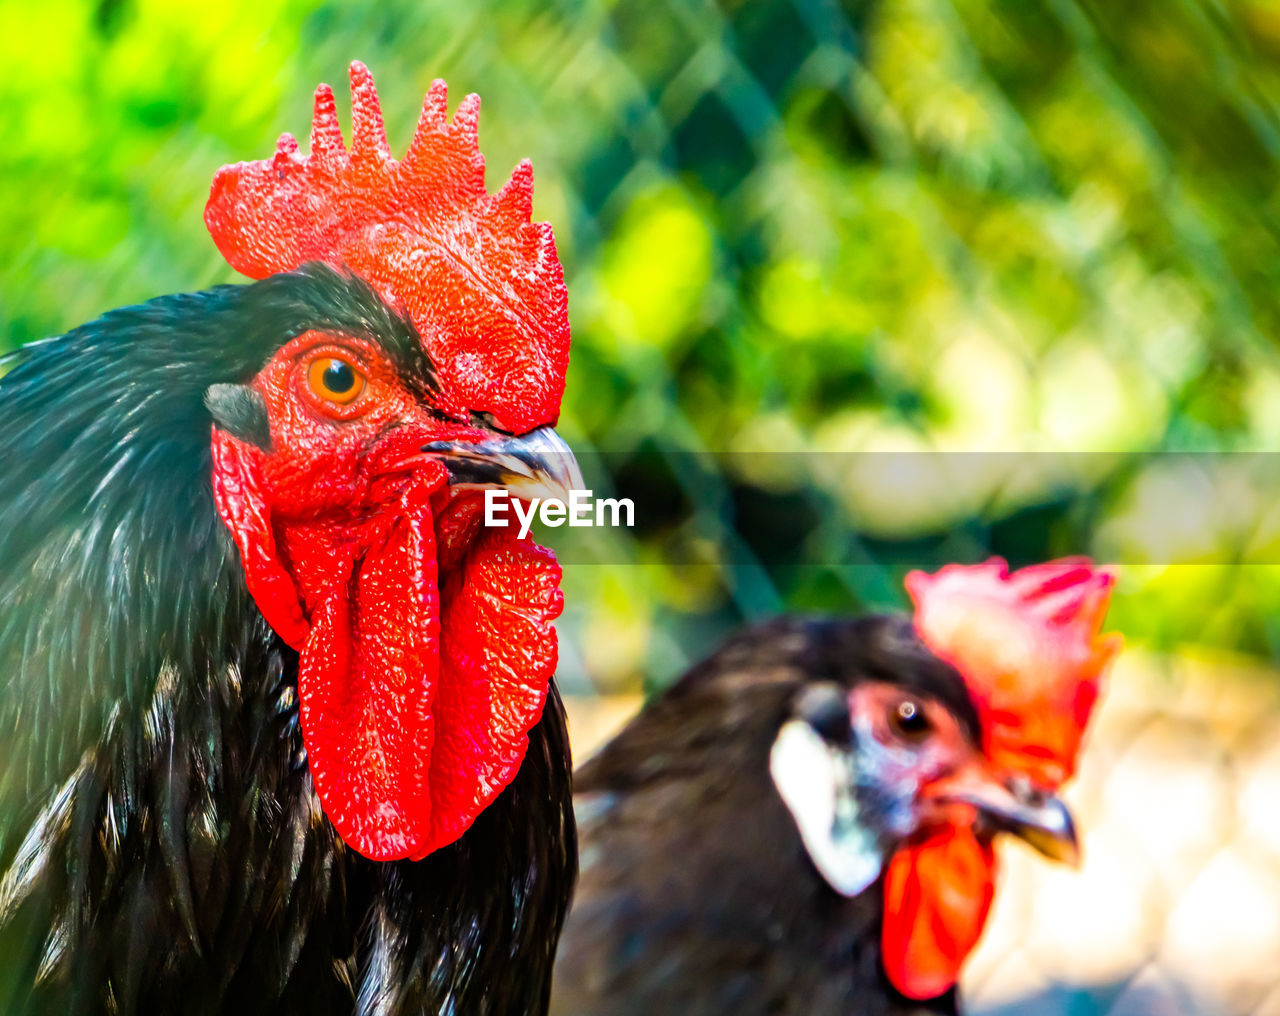 livestock, bird, chicken, animal themes, animal, domestic animals, rooster, pet, agriculture, mammal, comb, farm, cockerel, beak, nature, red, fowl, animal body part, no people, poultry, group of animals, close-up, rural scene, outdoors, focus on foreground, animal head, hen